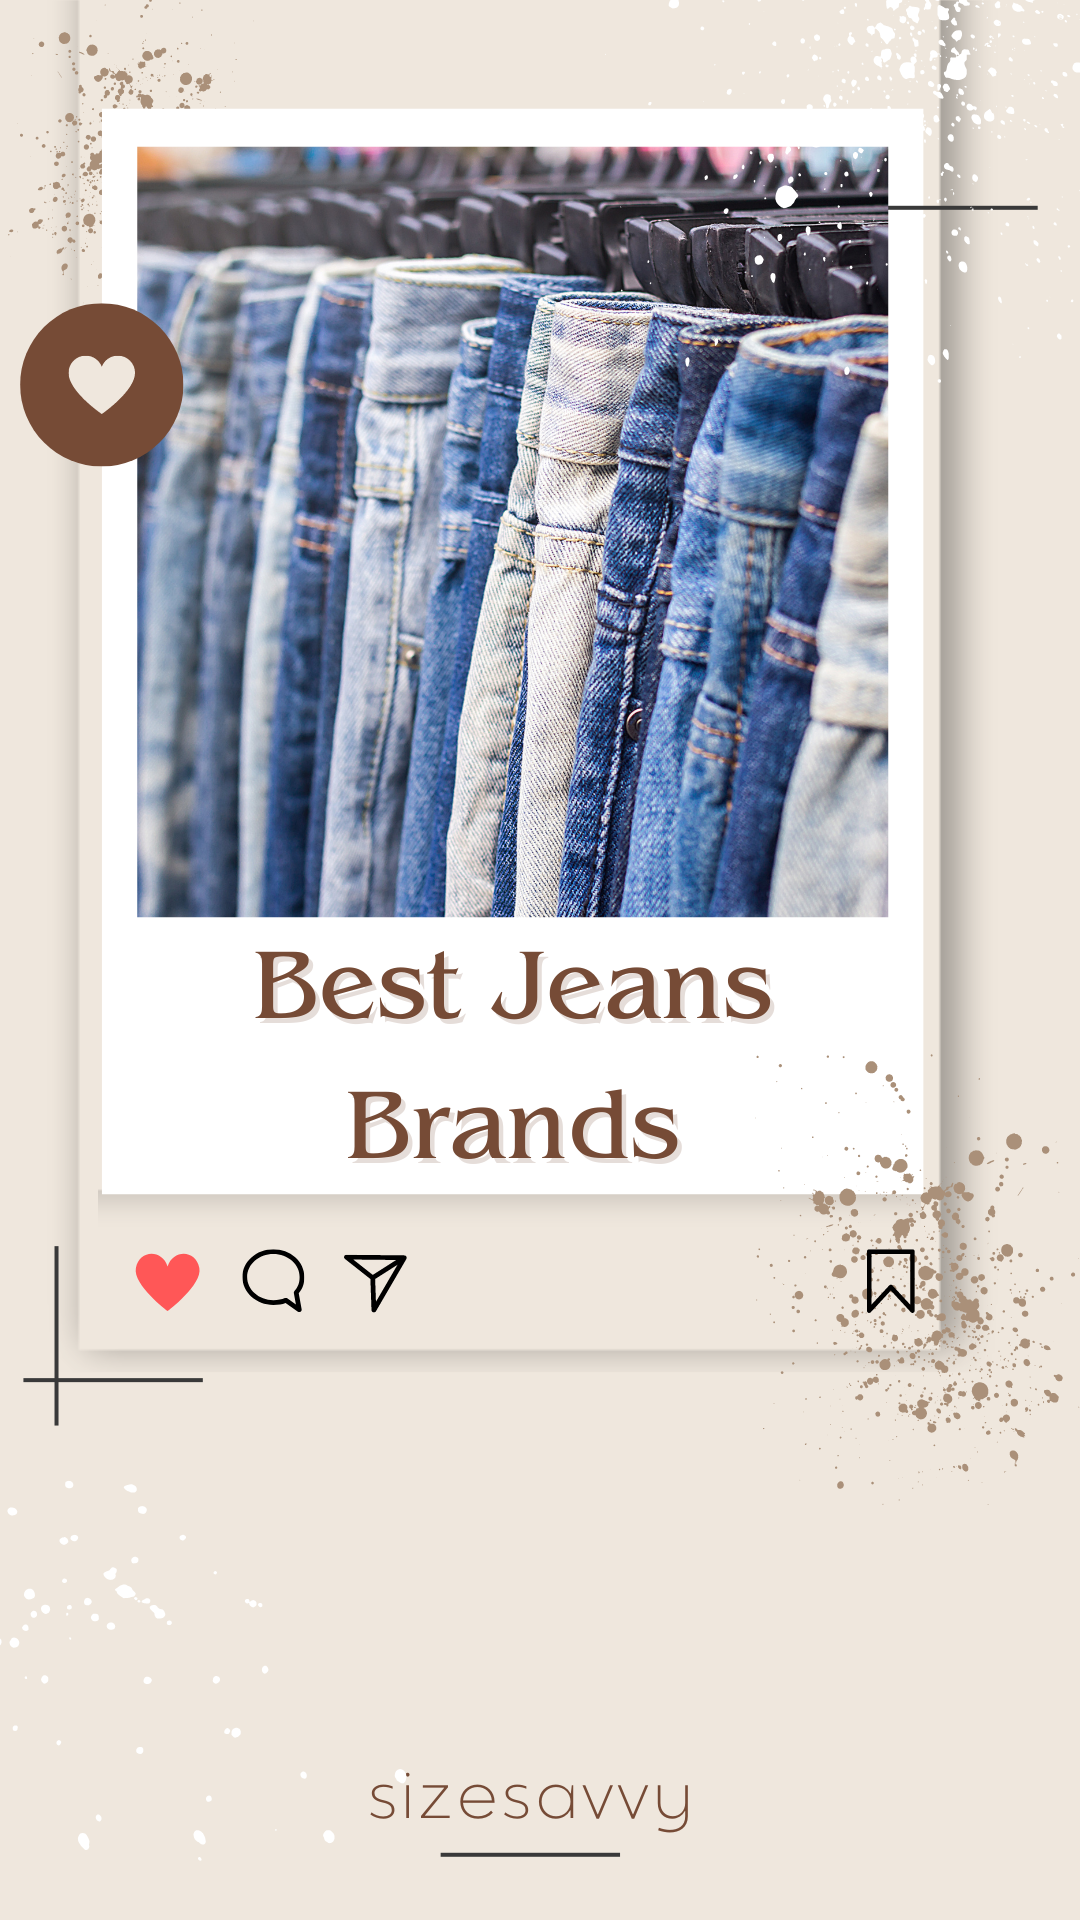 Best Jeans Brands in India